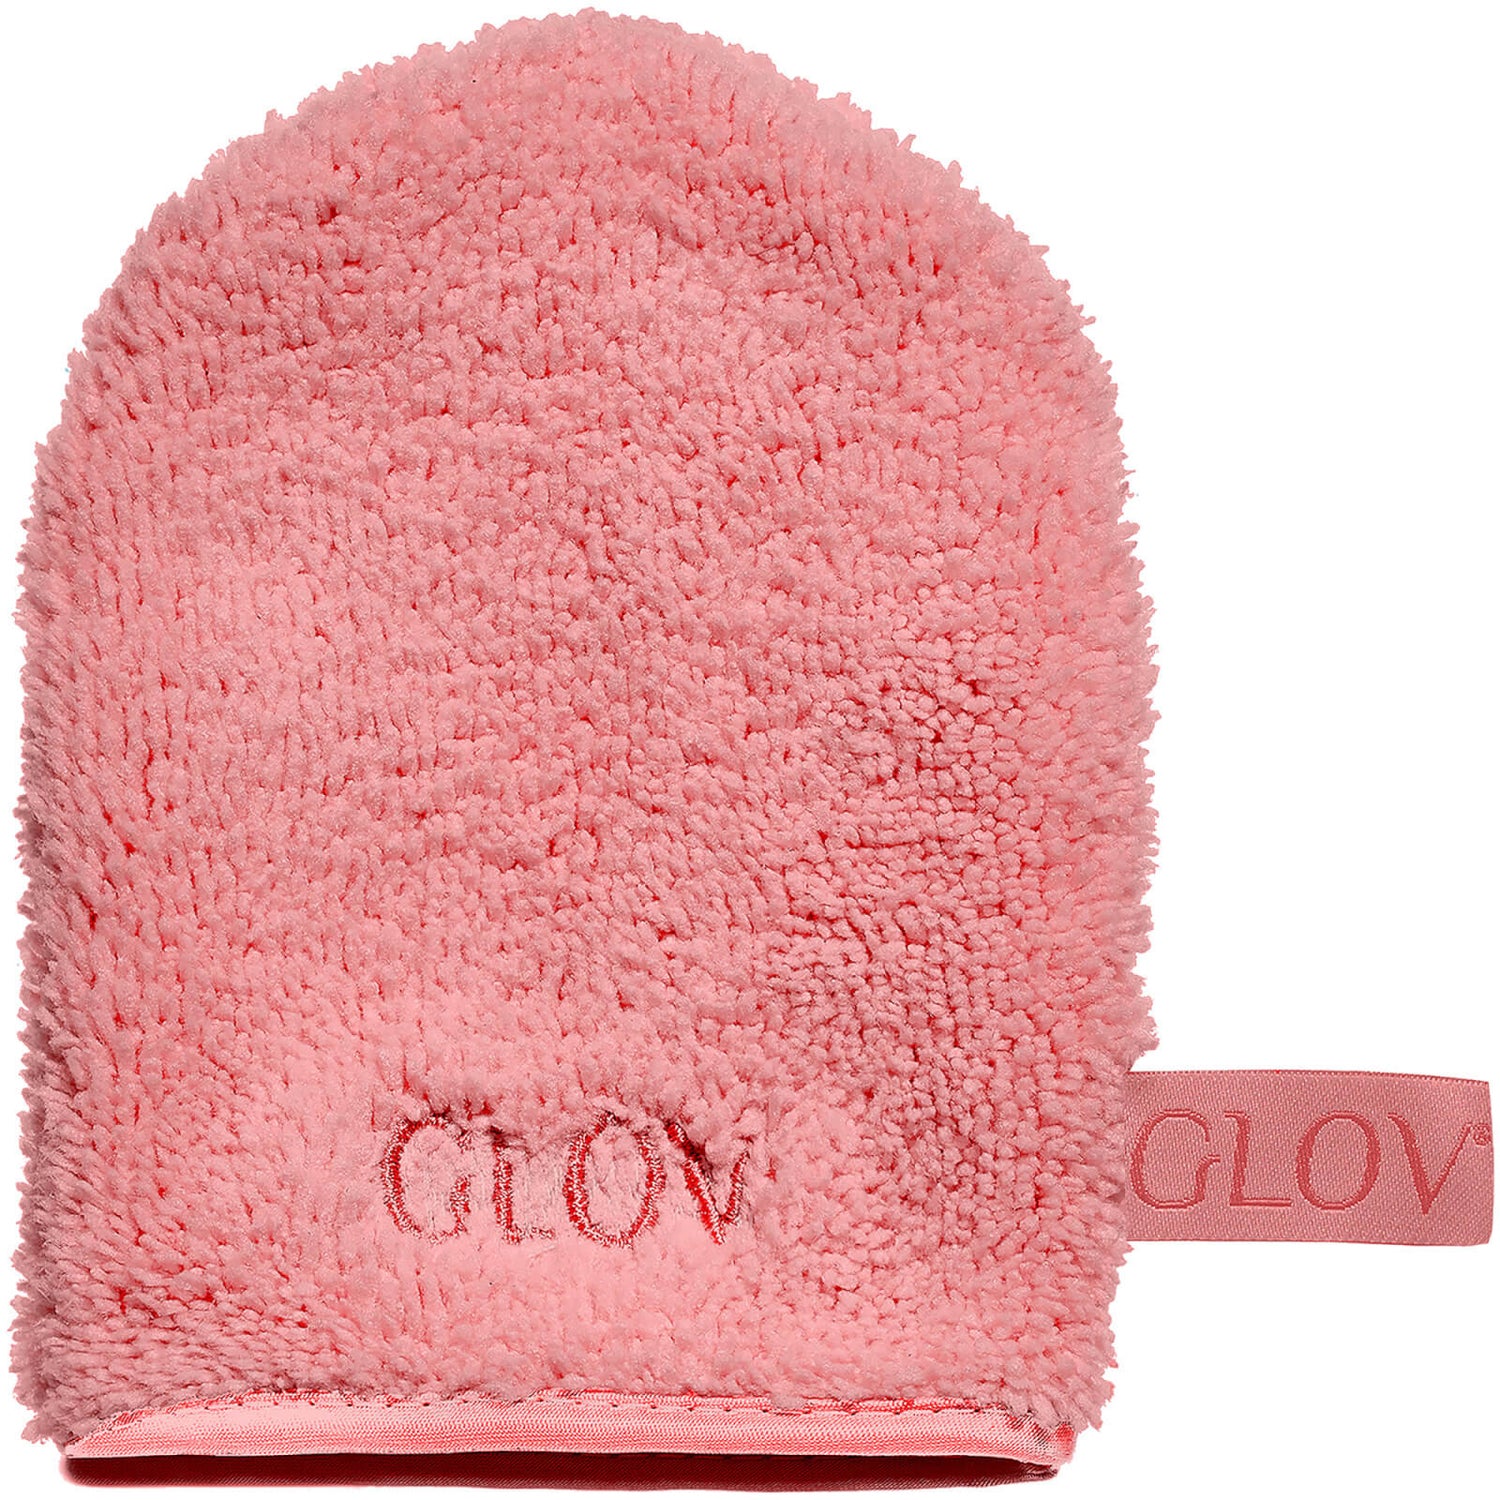 GLOV® Water-Only Makeup Removing and Skin Cleansing Mitt - Cheeky Peach